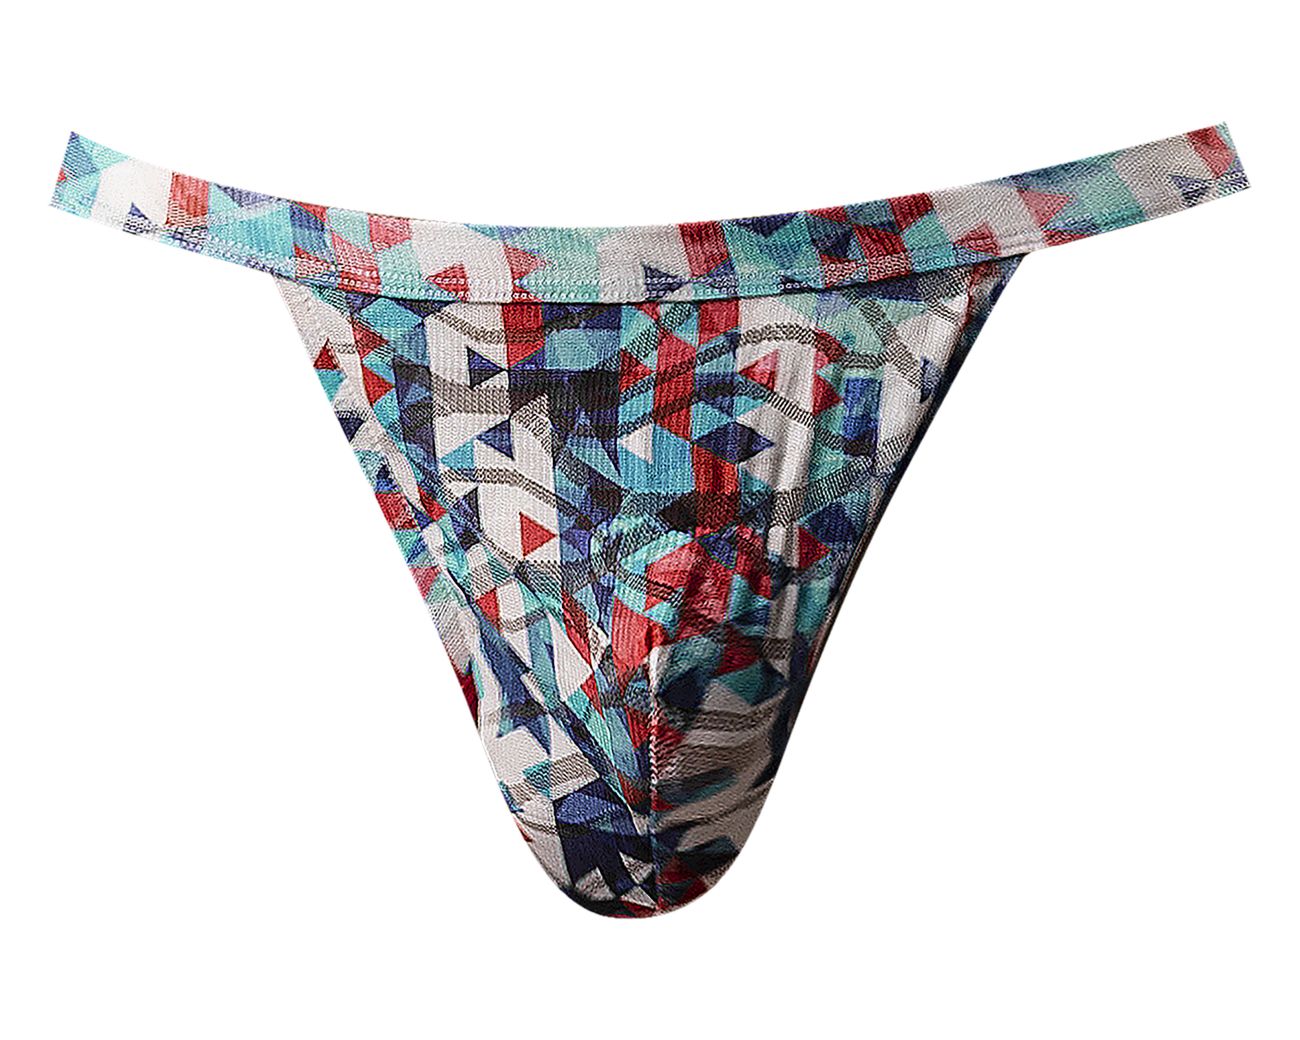 Male Power 331-293 Your Lace Or Mine Jock Red-White-Blue